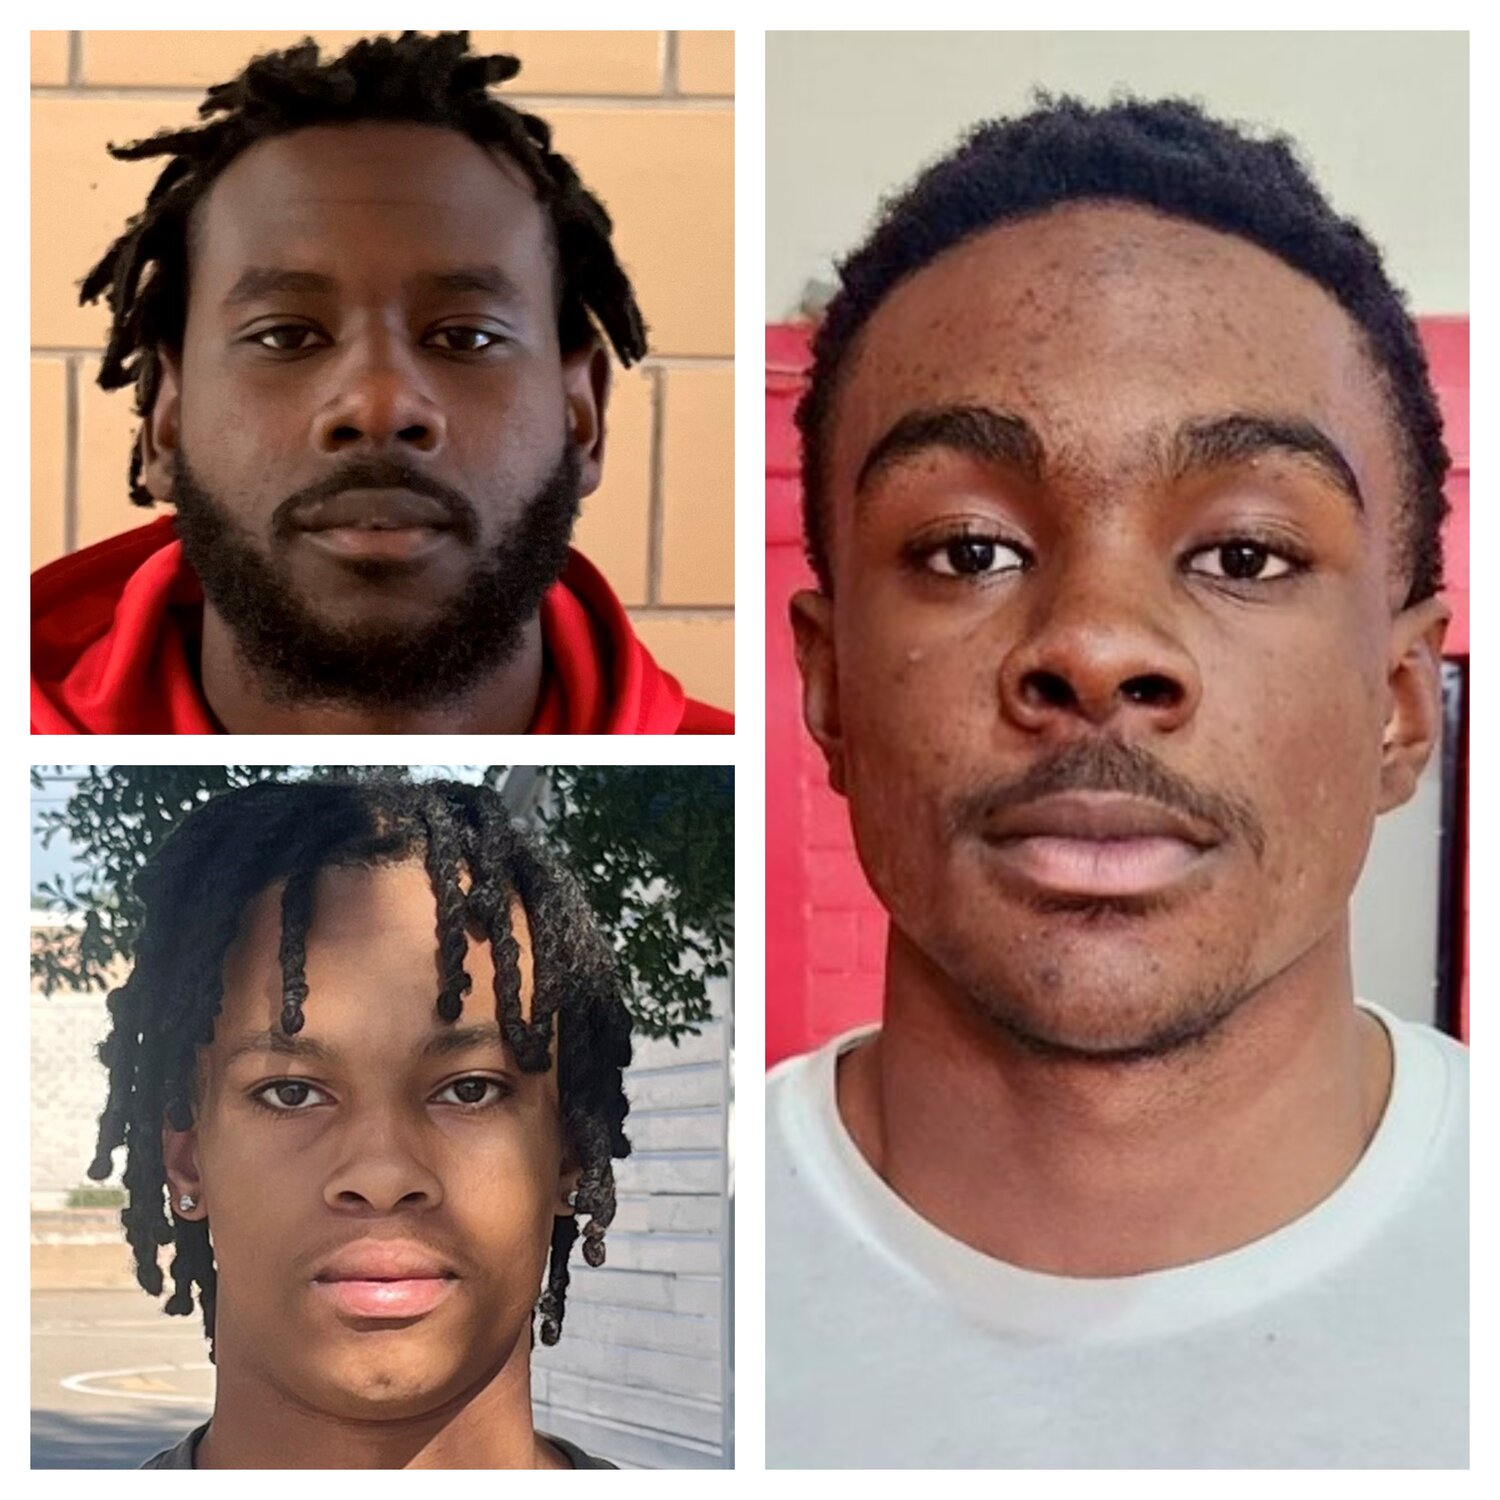 Clockwise from top left: Jonathan Higgins-Simmons plays both running back and slot receiver for Terry Sanford; Seventy-First linebacker Melik Thomas leads the squad in tackles for loss with 28 this season; and free safety Damien Gary caused three fumbles, recovered one and had two interceptions last week in Cape Fear's win over West Alamance.